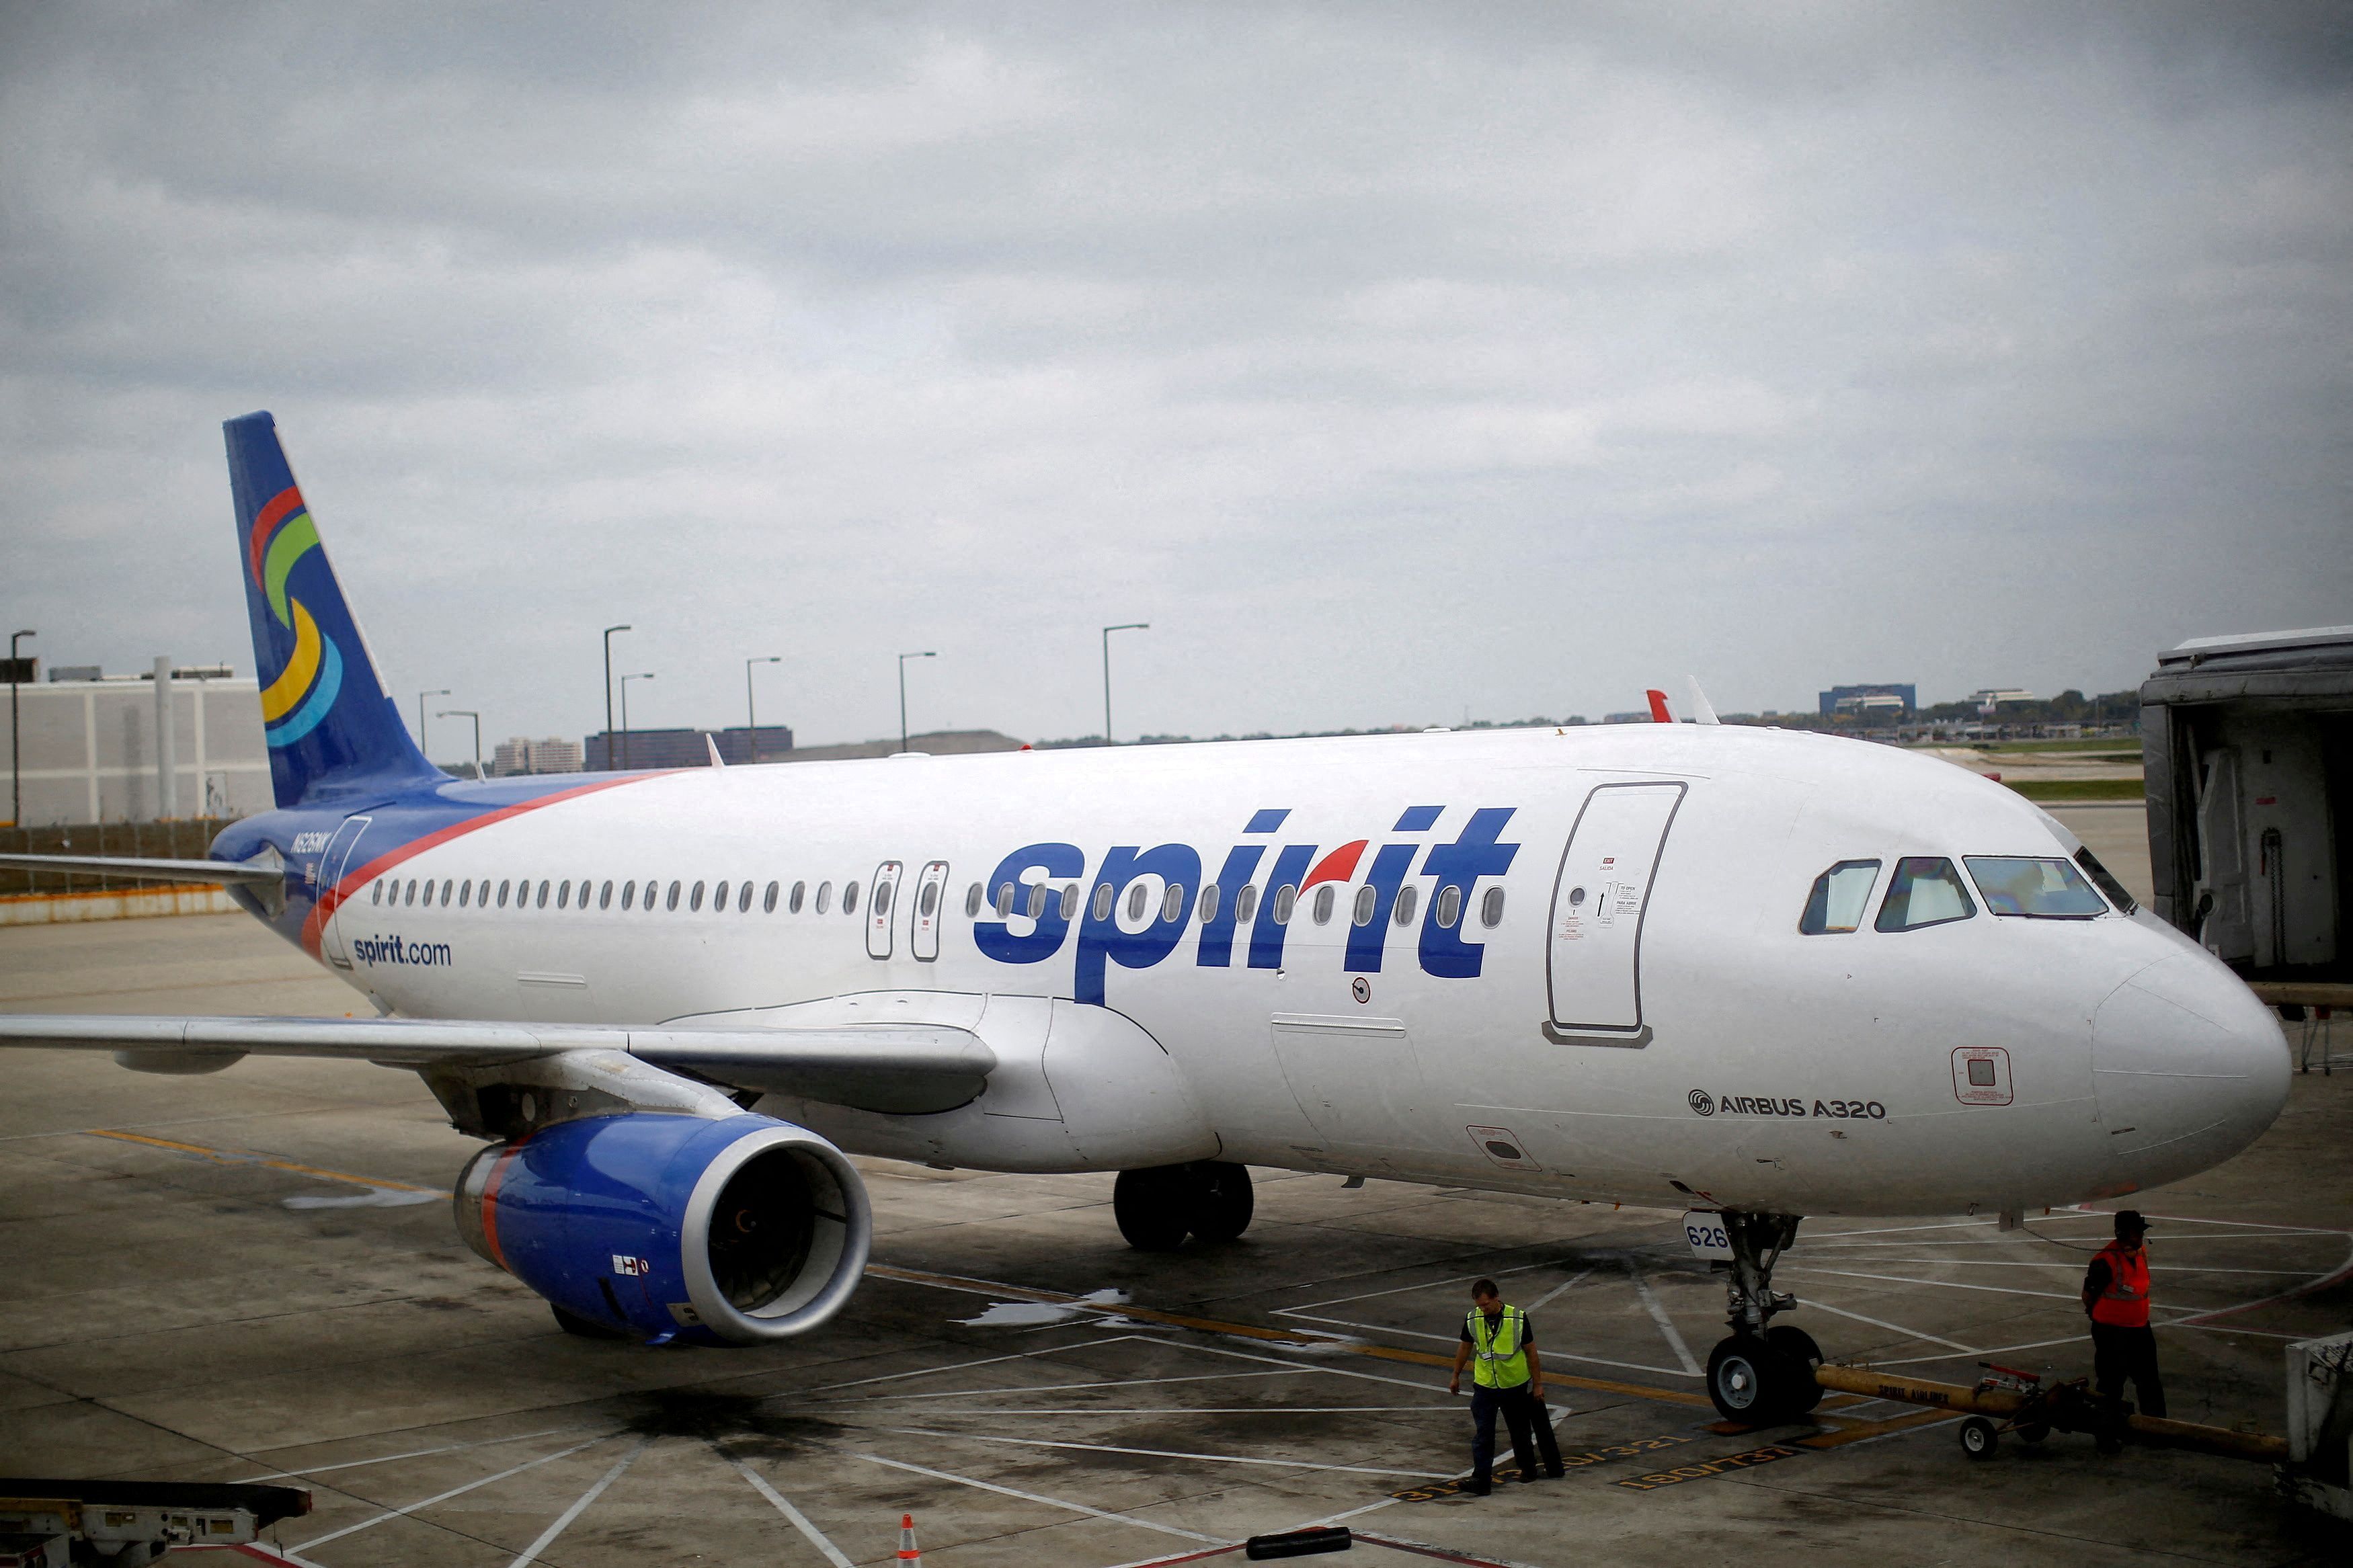 A Spirit Airlines A320-200 airplane sits at a gate at the O'Hare Airport in Chicago, Illinois